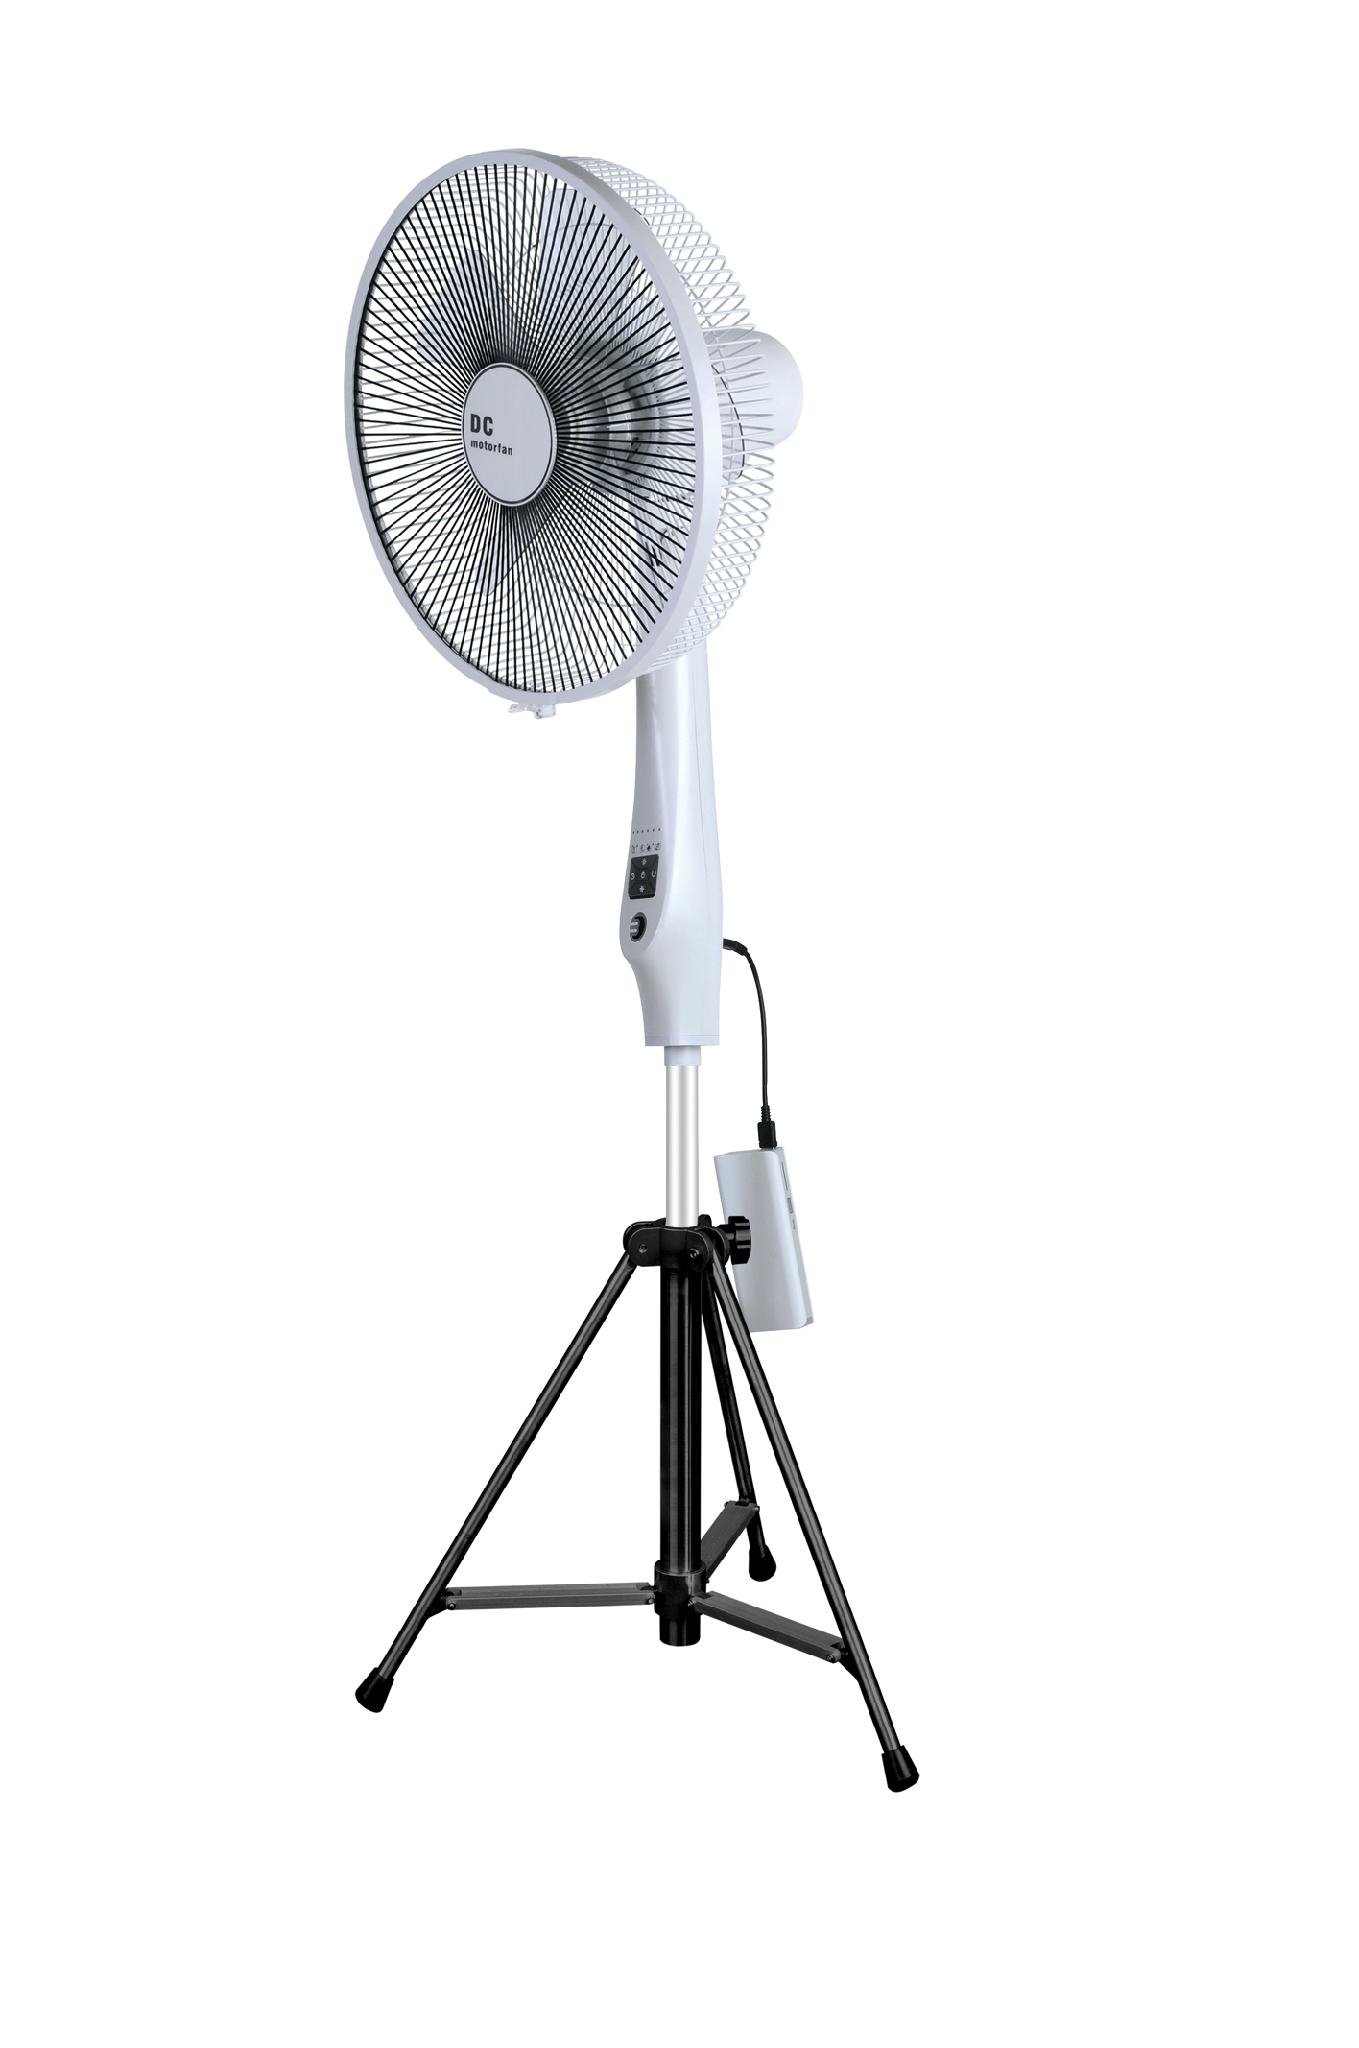 Rechargeable DC Motor Stand Fan Driven by Power Bank 5